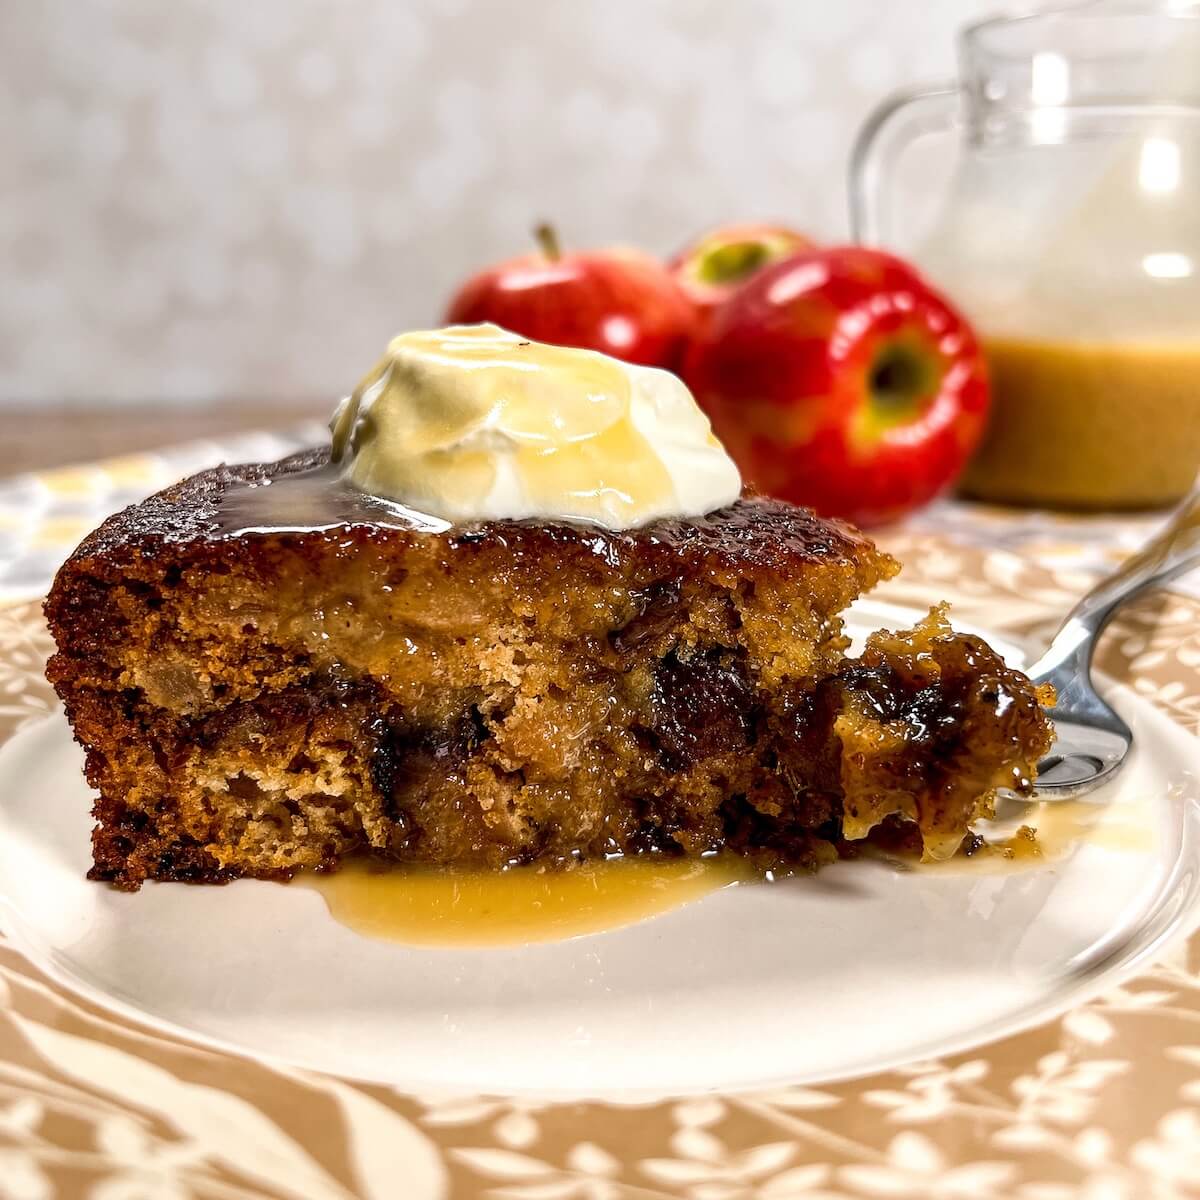 Slice of sticky toffee apple pudding with a bite on a fork on a plate with the rest of the cake on a cake stand with jug of honey toffee sauce and apples behind.